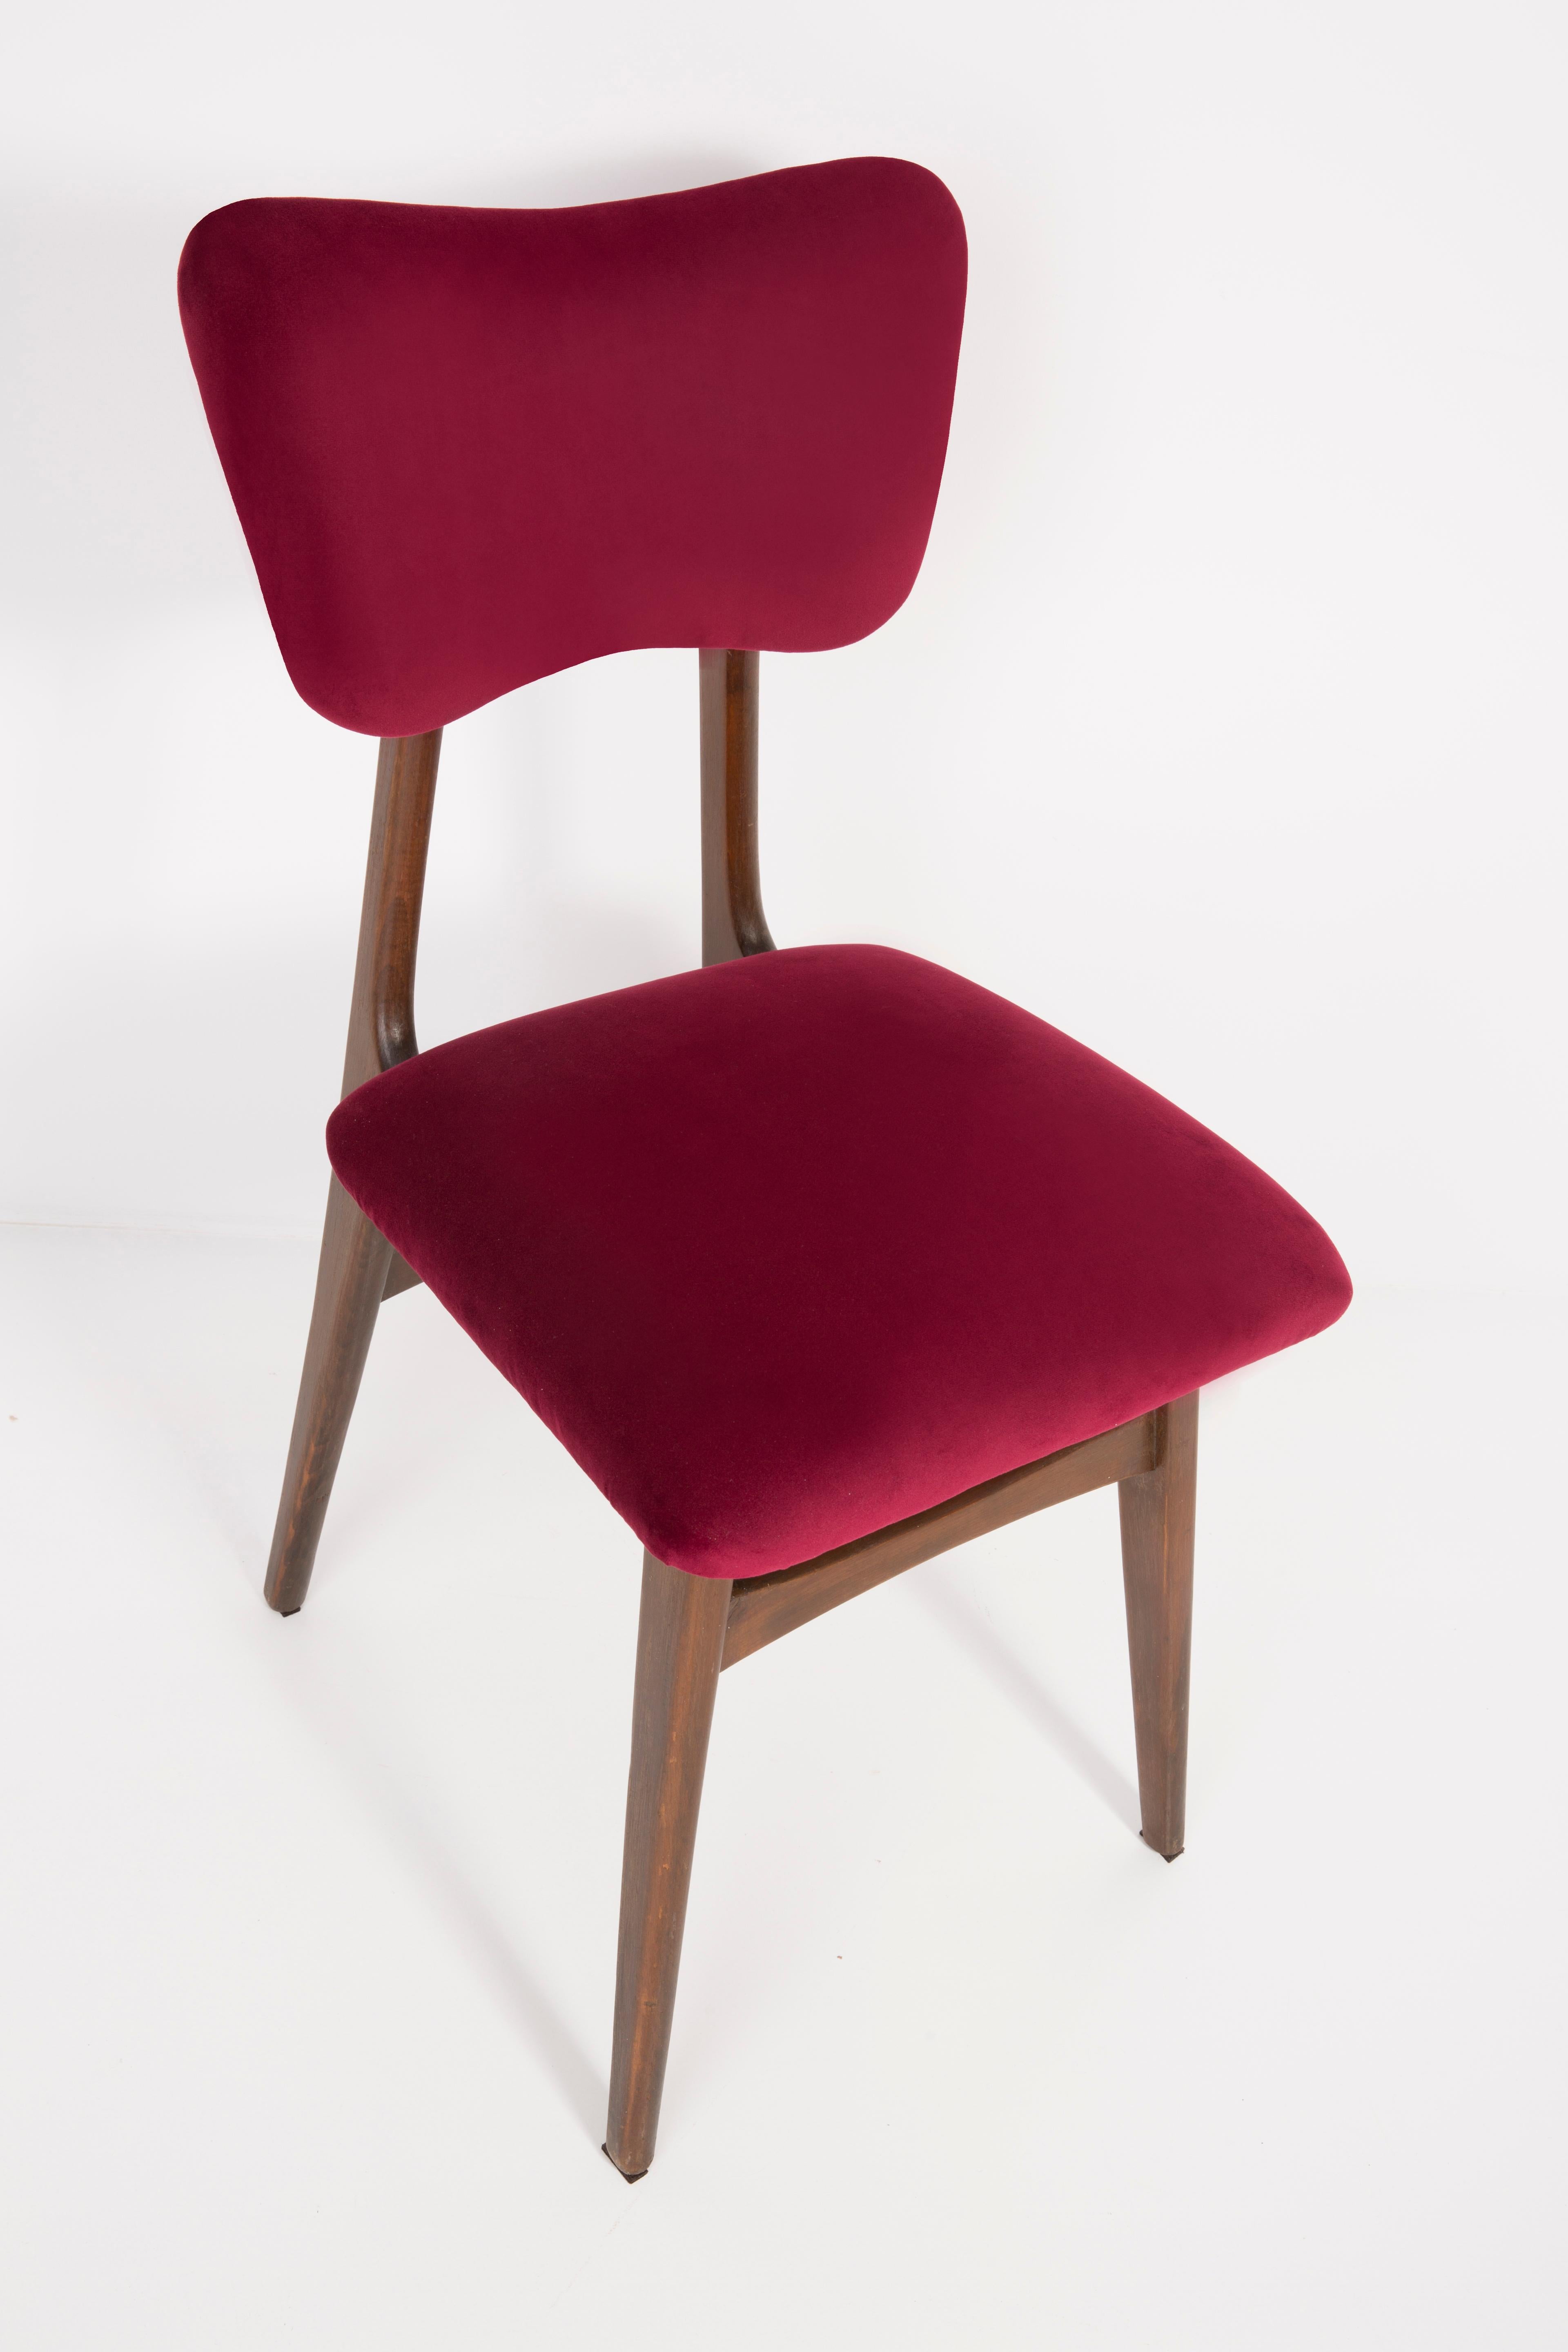 Set of Twelve 20th Century Burgundy Red Chairs, 1960s For Sale 3